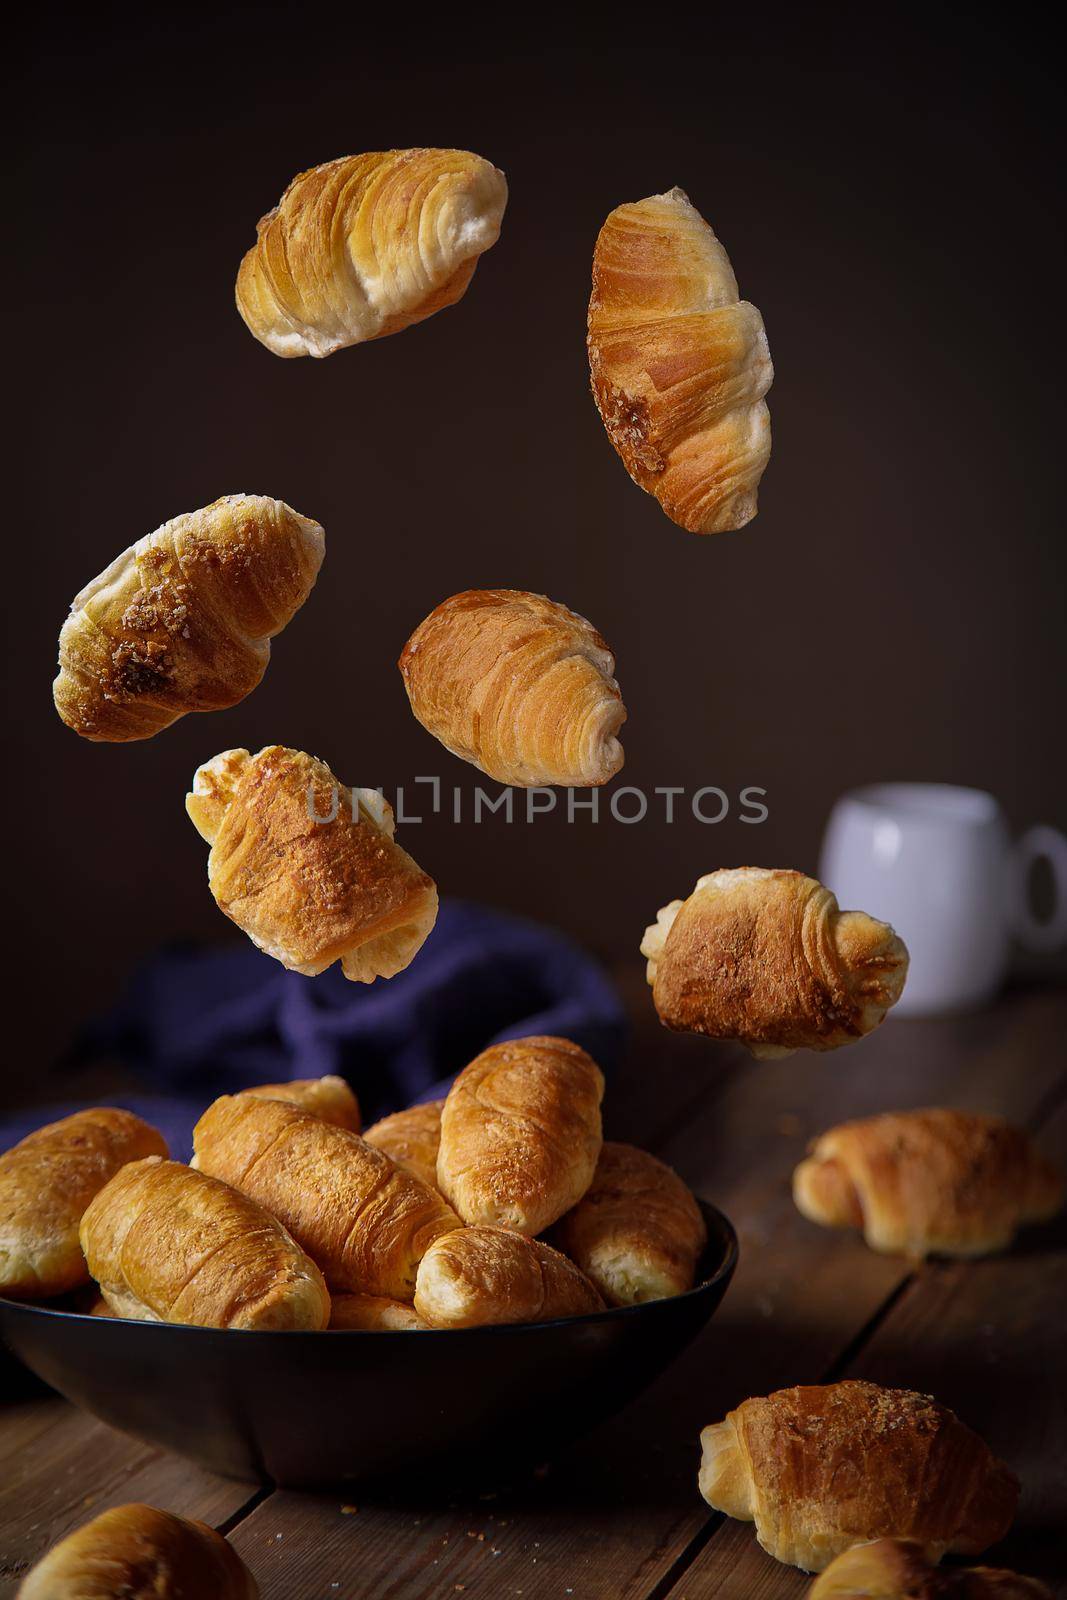 Fresh croissants fly into the plate in different positions. Levitation.